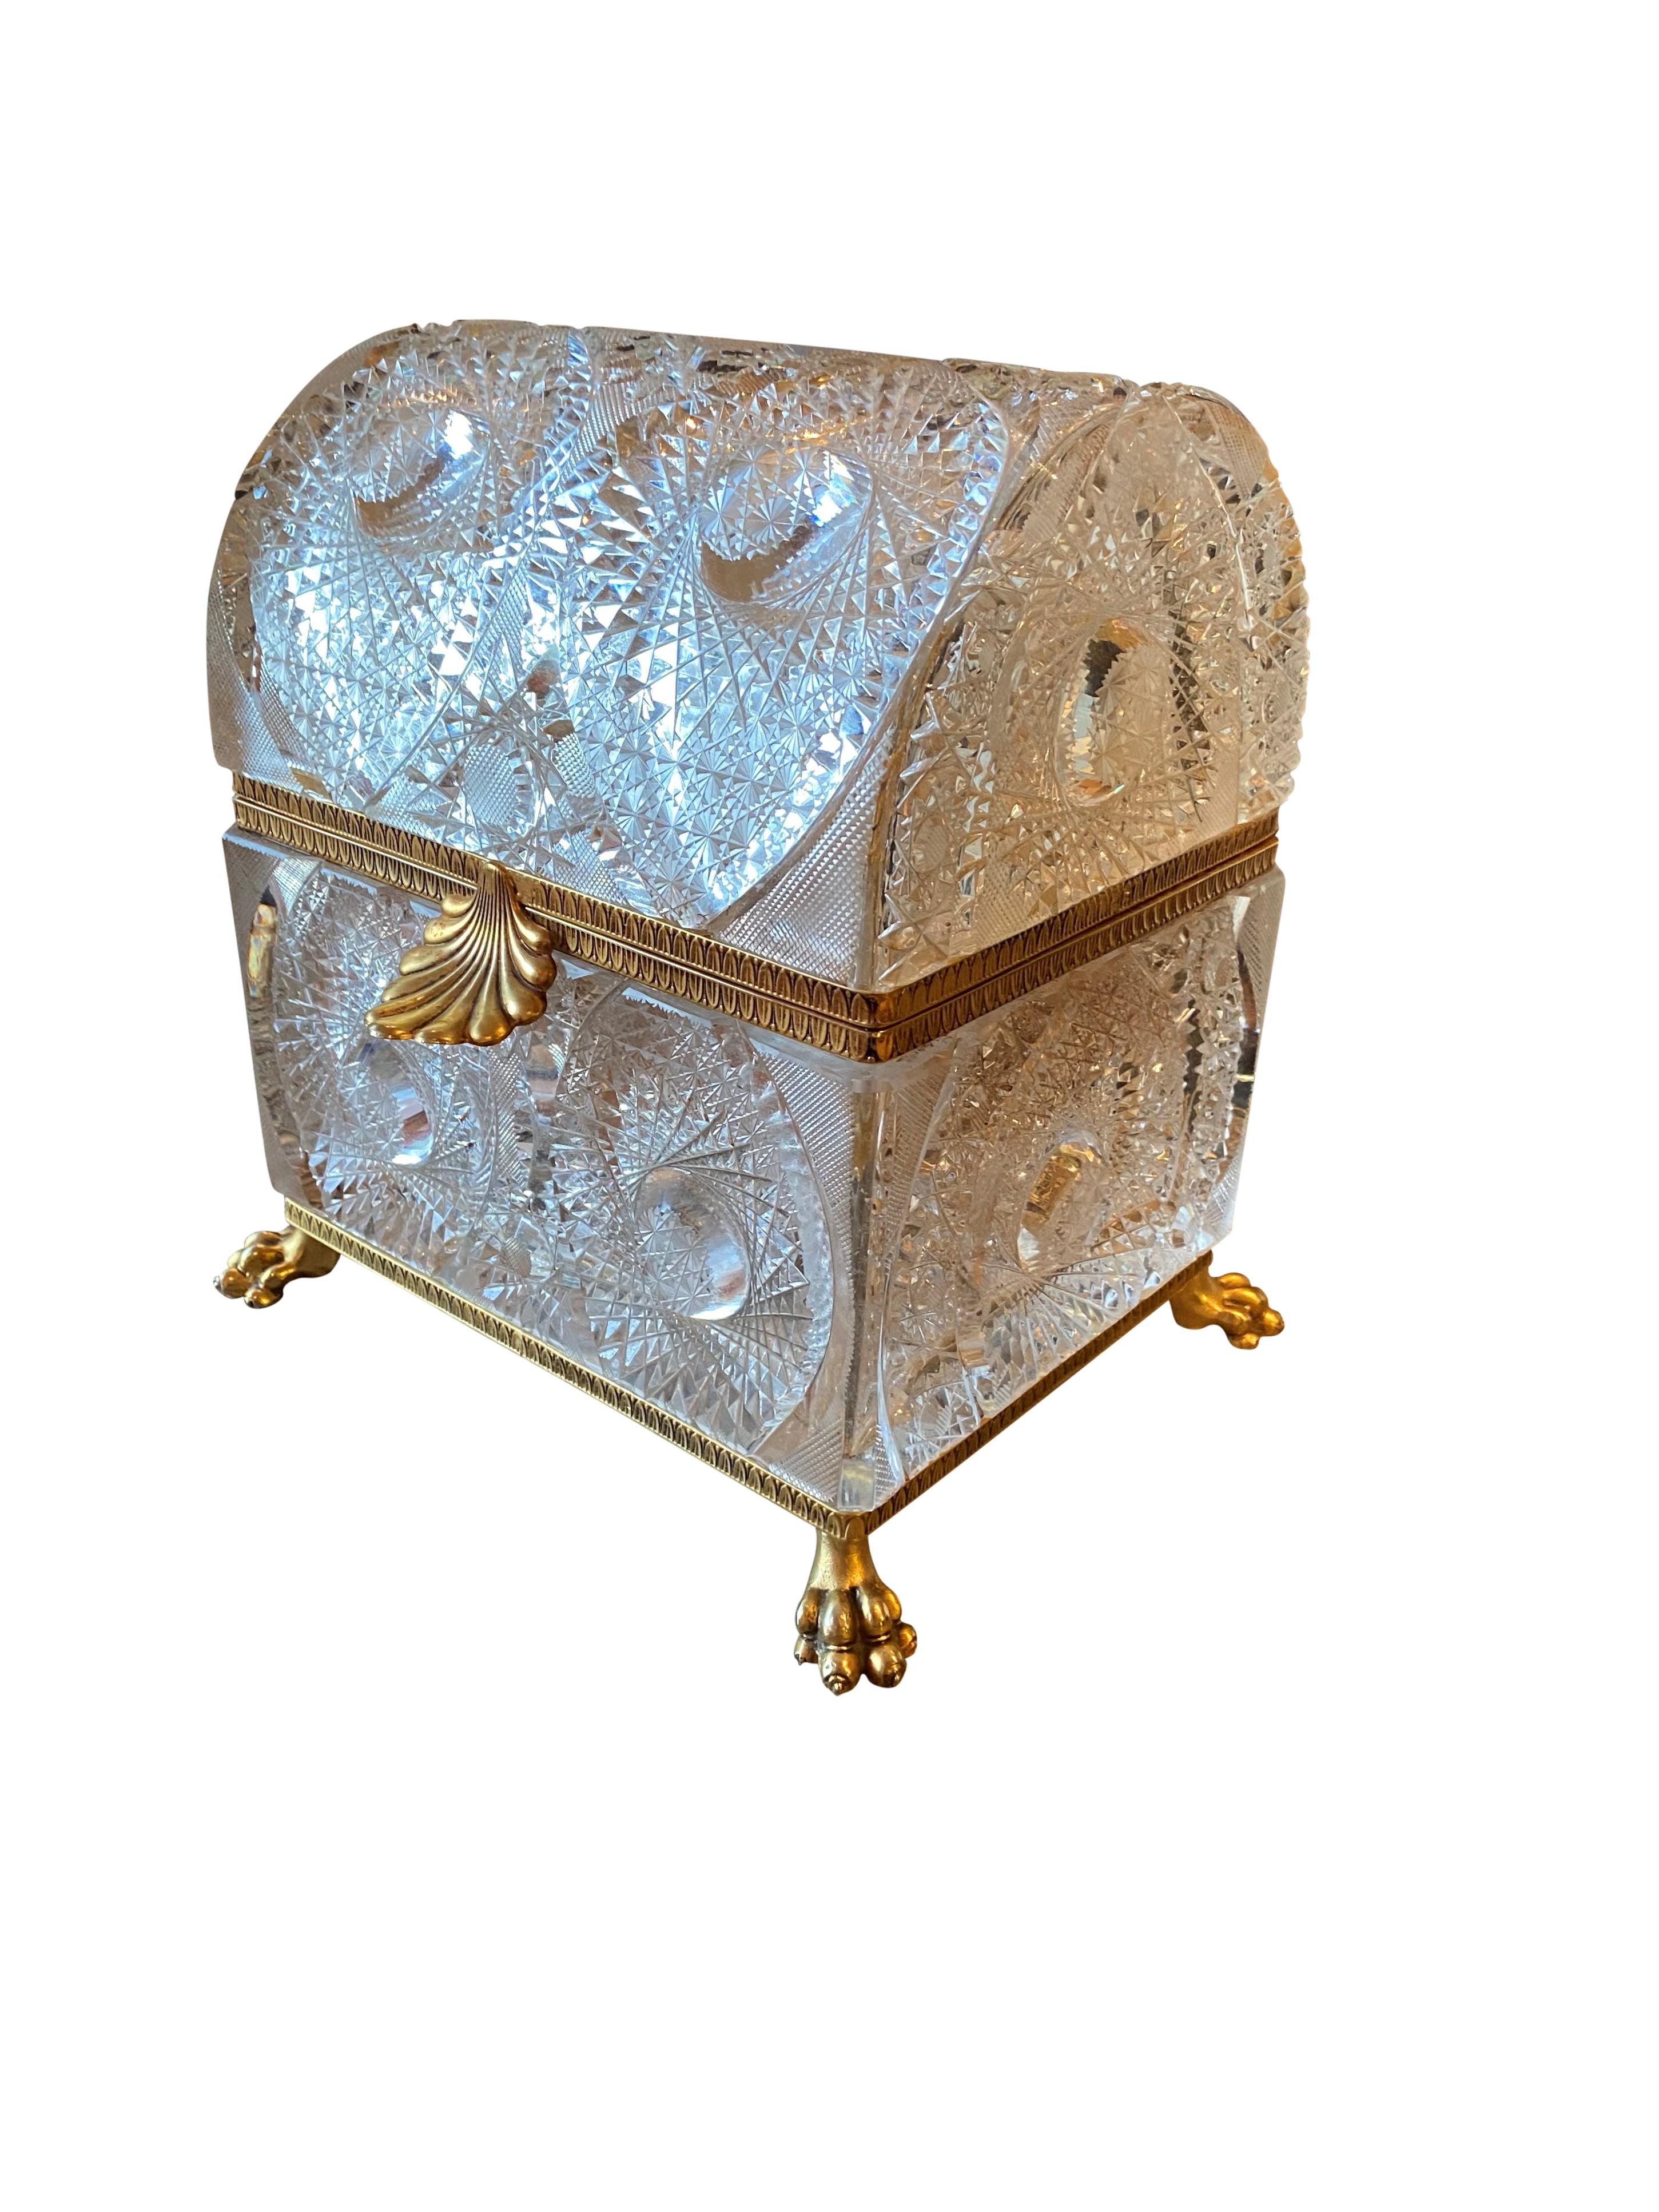 Hand-Crafted French Gilt Bronze Mounted Cut Glass Domed Casket Cristal Frères, Martin Benito